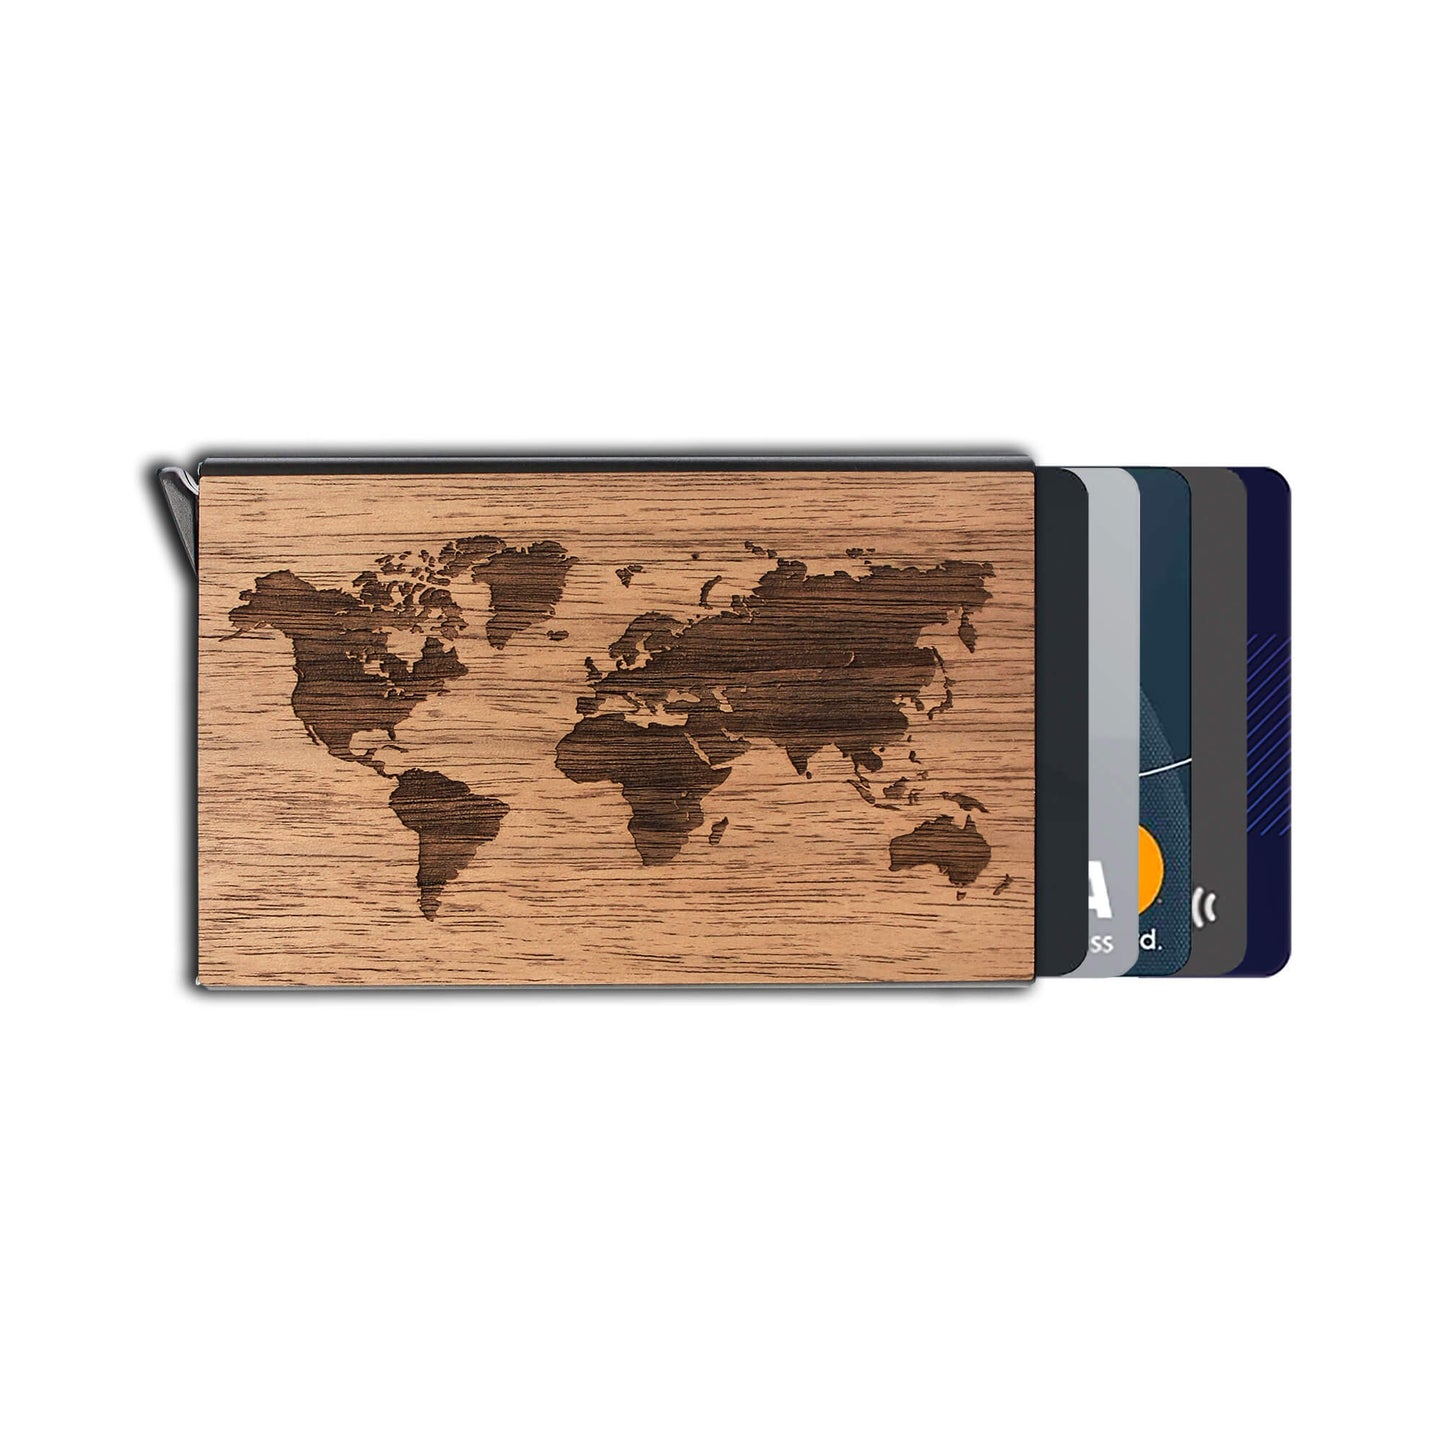 World Map - Wood & Metal Credit Card Holder with Pop Up